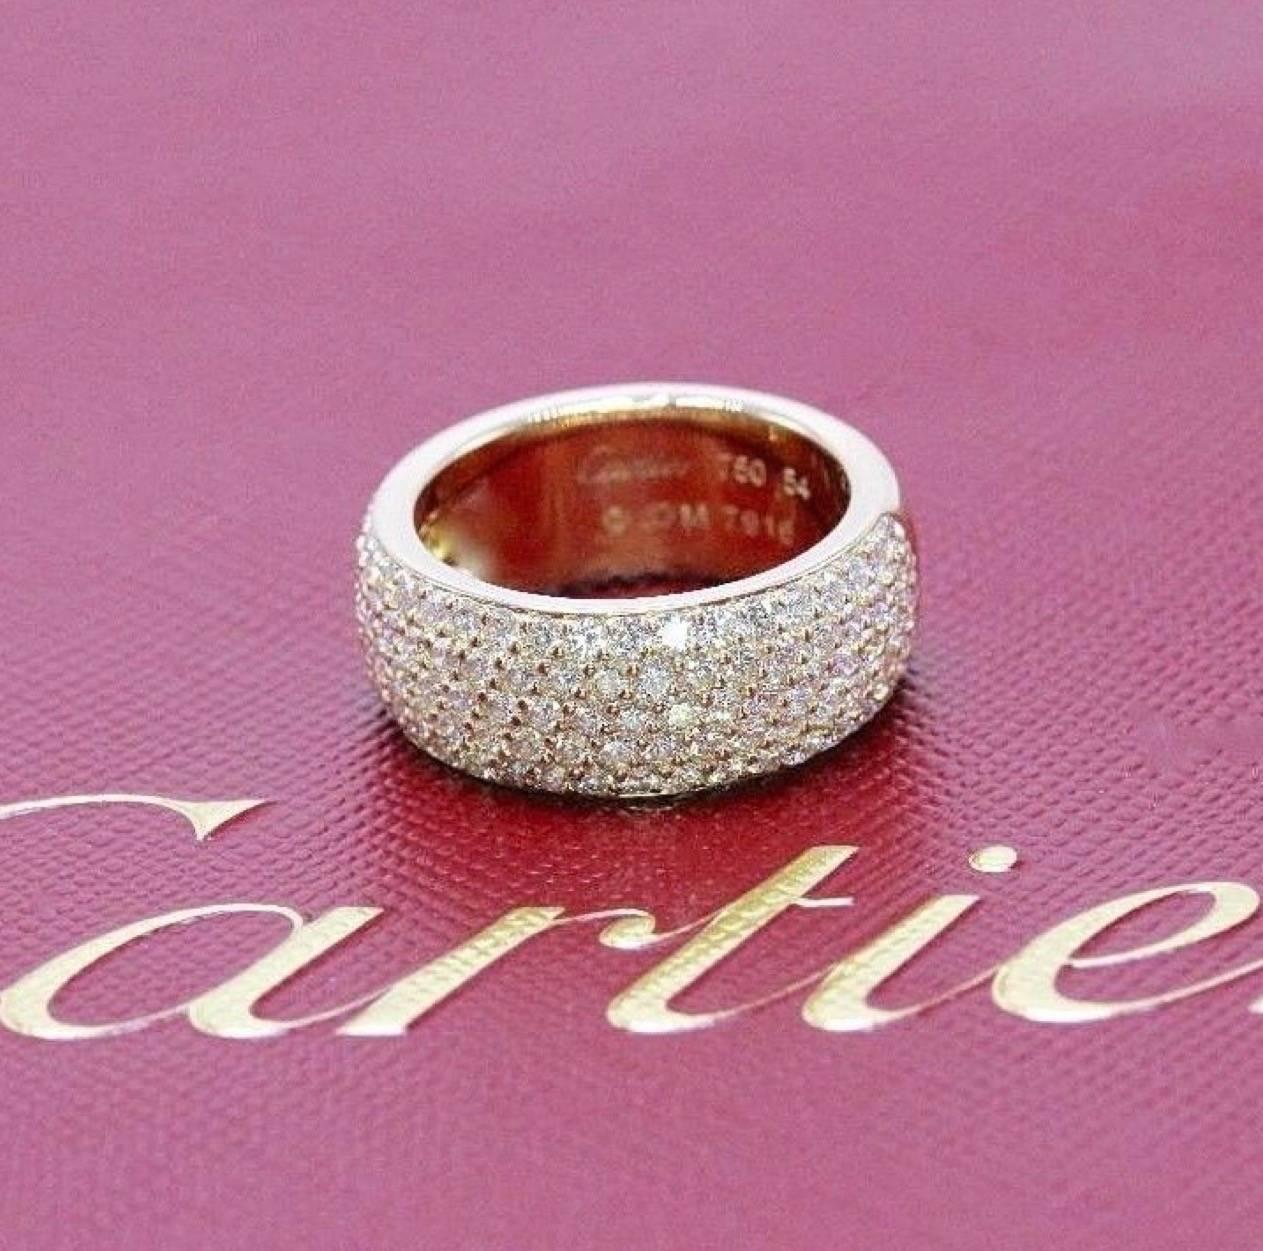 Cartier Classic Five-Row Diamond Pave Wedding Band Ring 18 Karat Gold 2.00 TCW In Excellent Condition For Sale In San Diego, CA